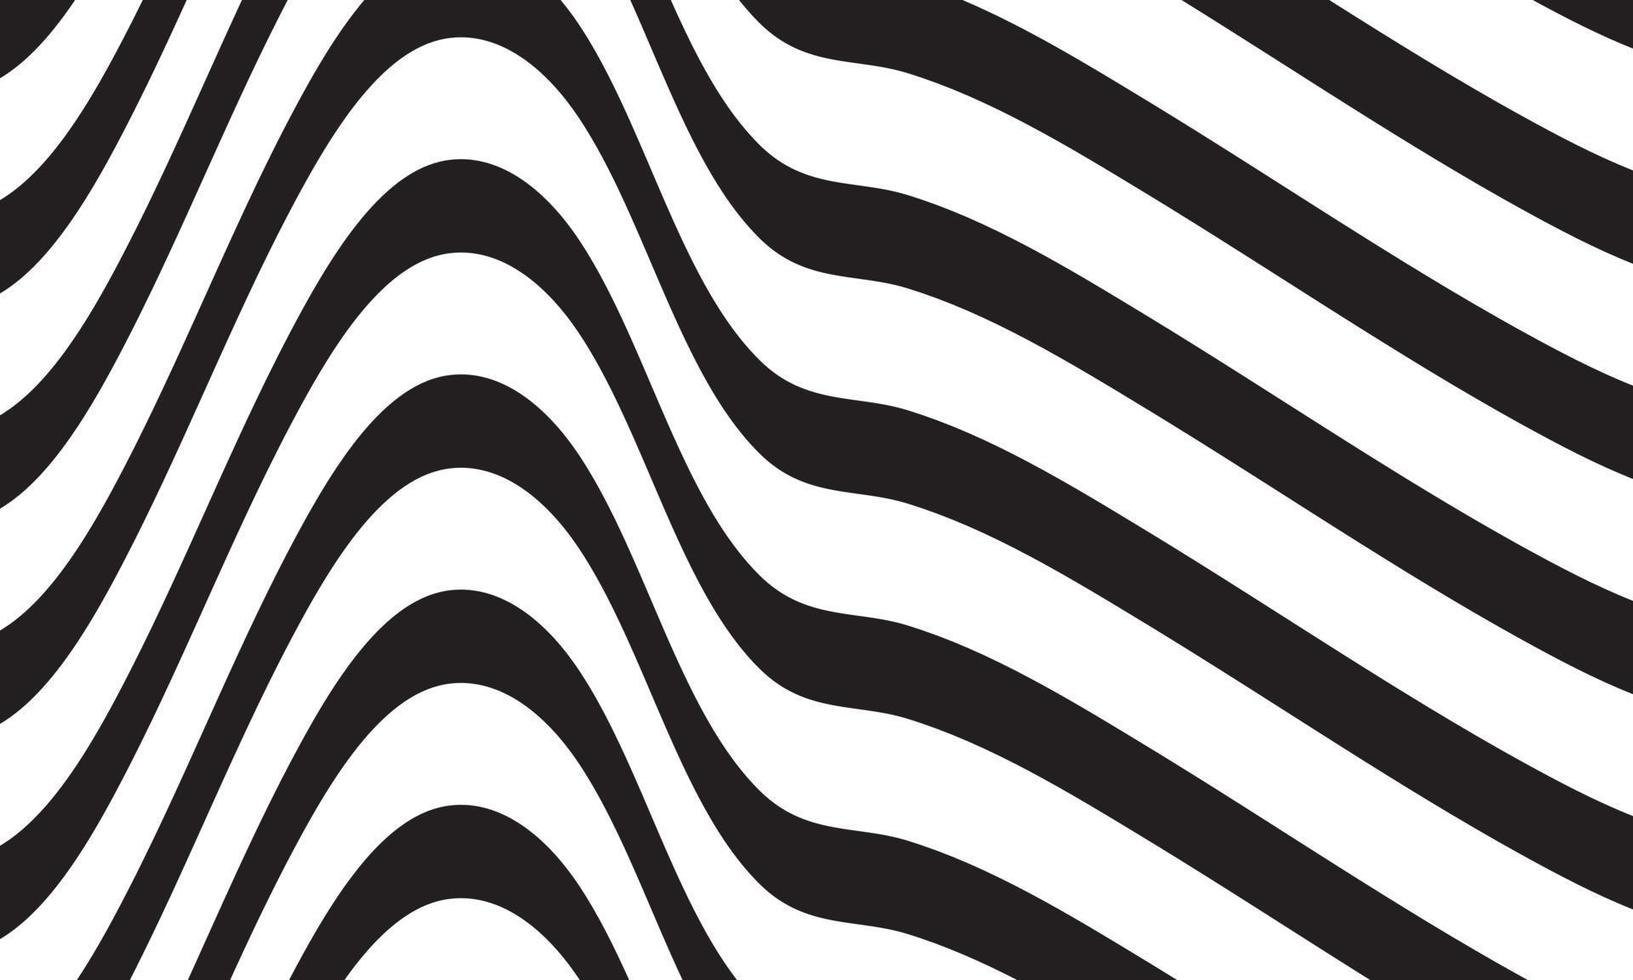 Abstract stripe background in black and white with wavy lines pattern. vector